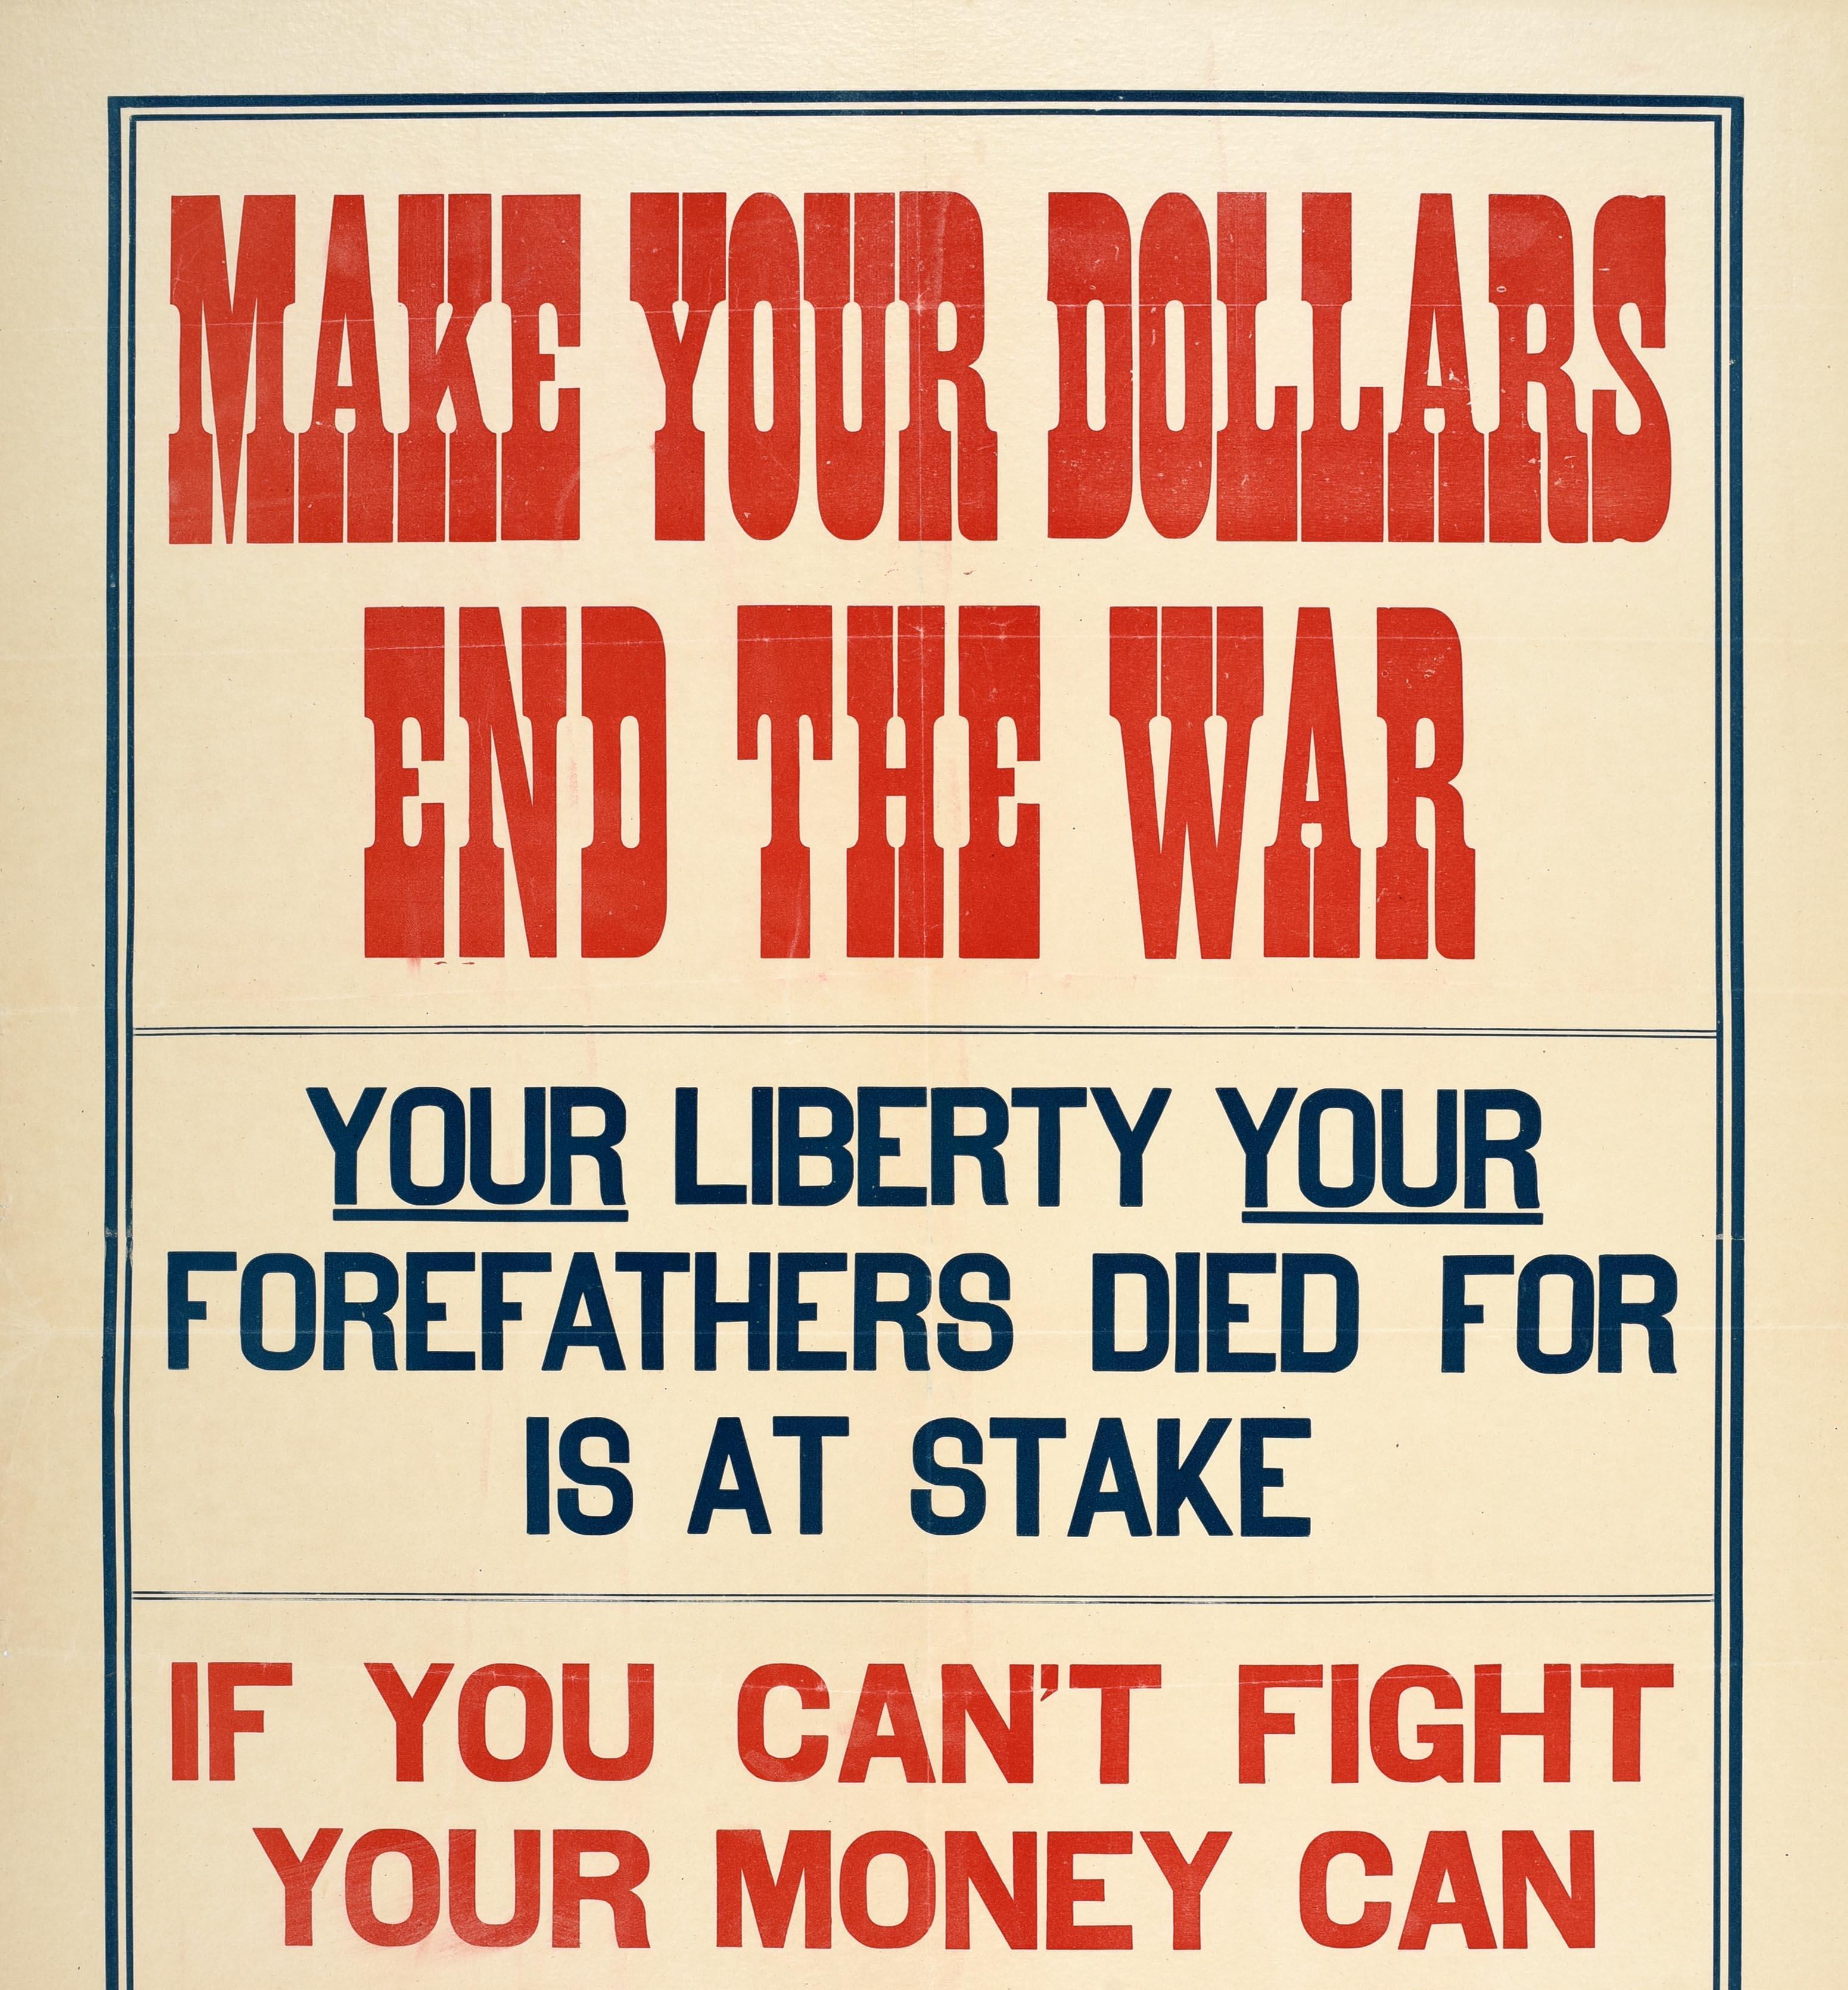 Original antique World War One home front war loan poster featuring bold red and blue lettering - Make your dollars end the war Your liberty your forefathers died for is at stake If you can't fight your money can Buy a liberty bond and Uncle Sam